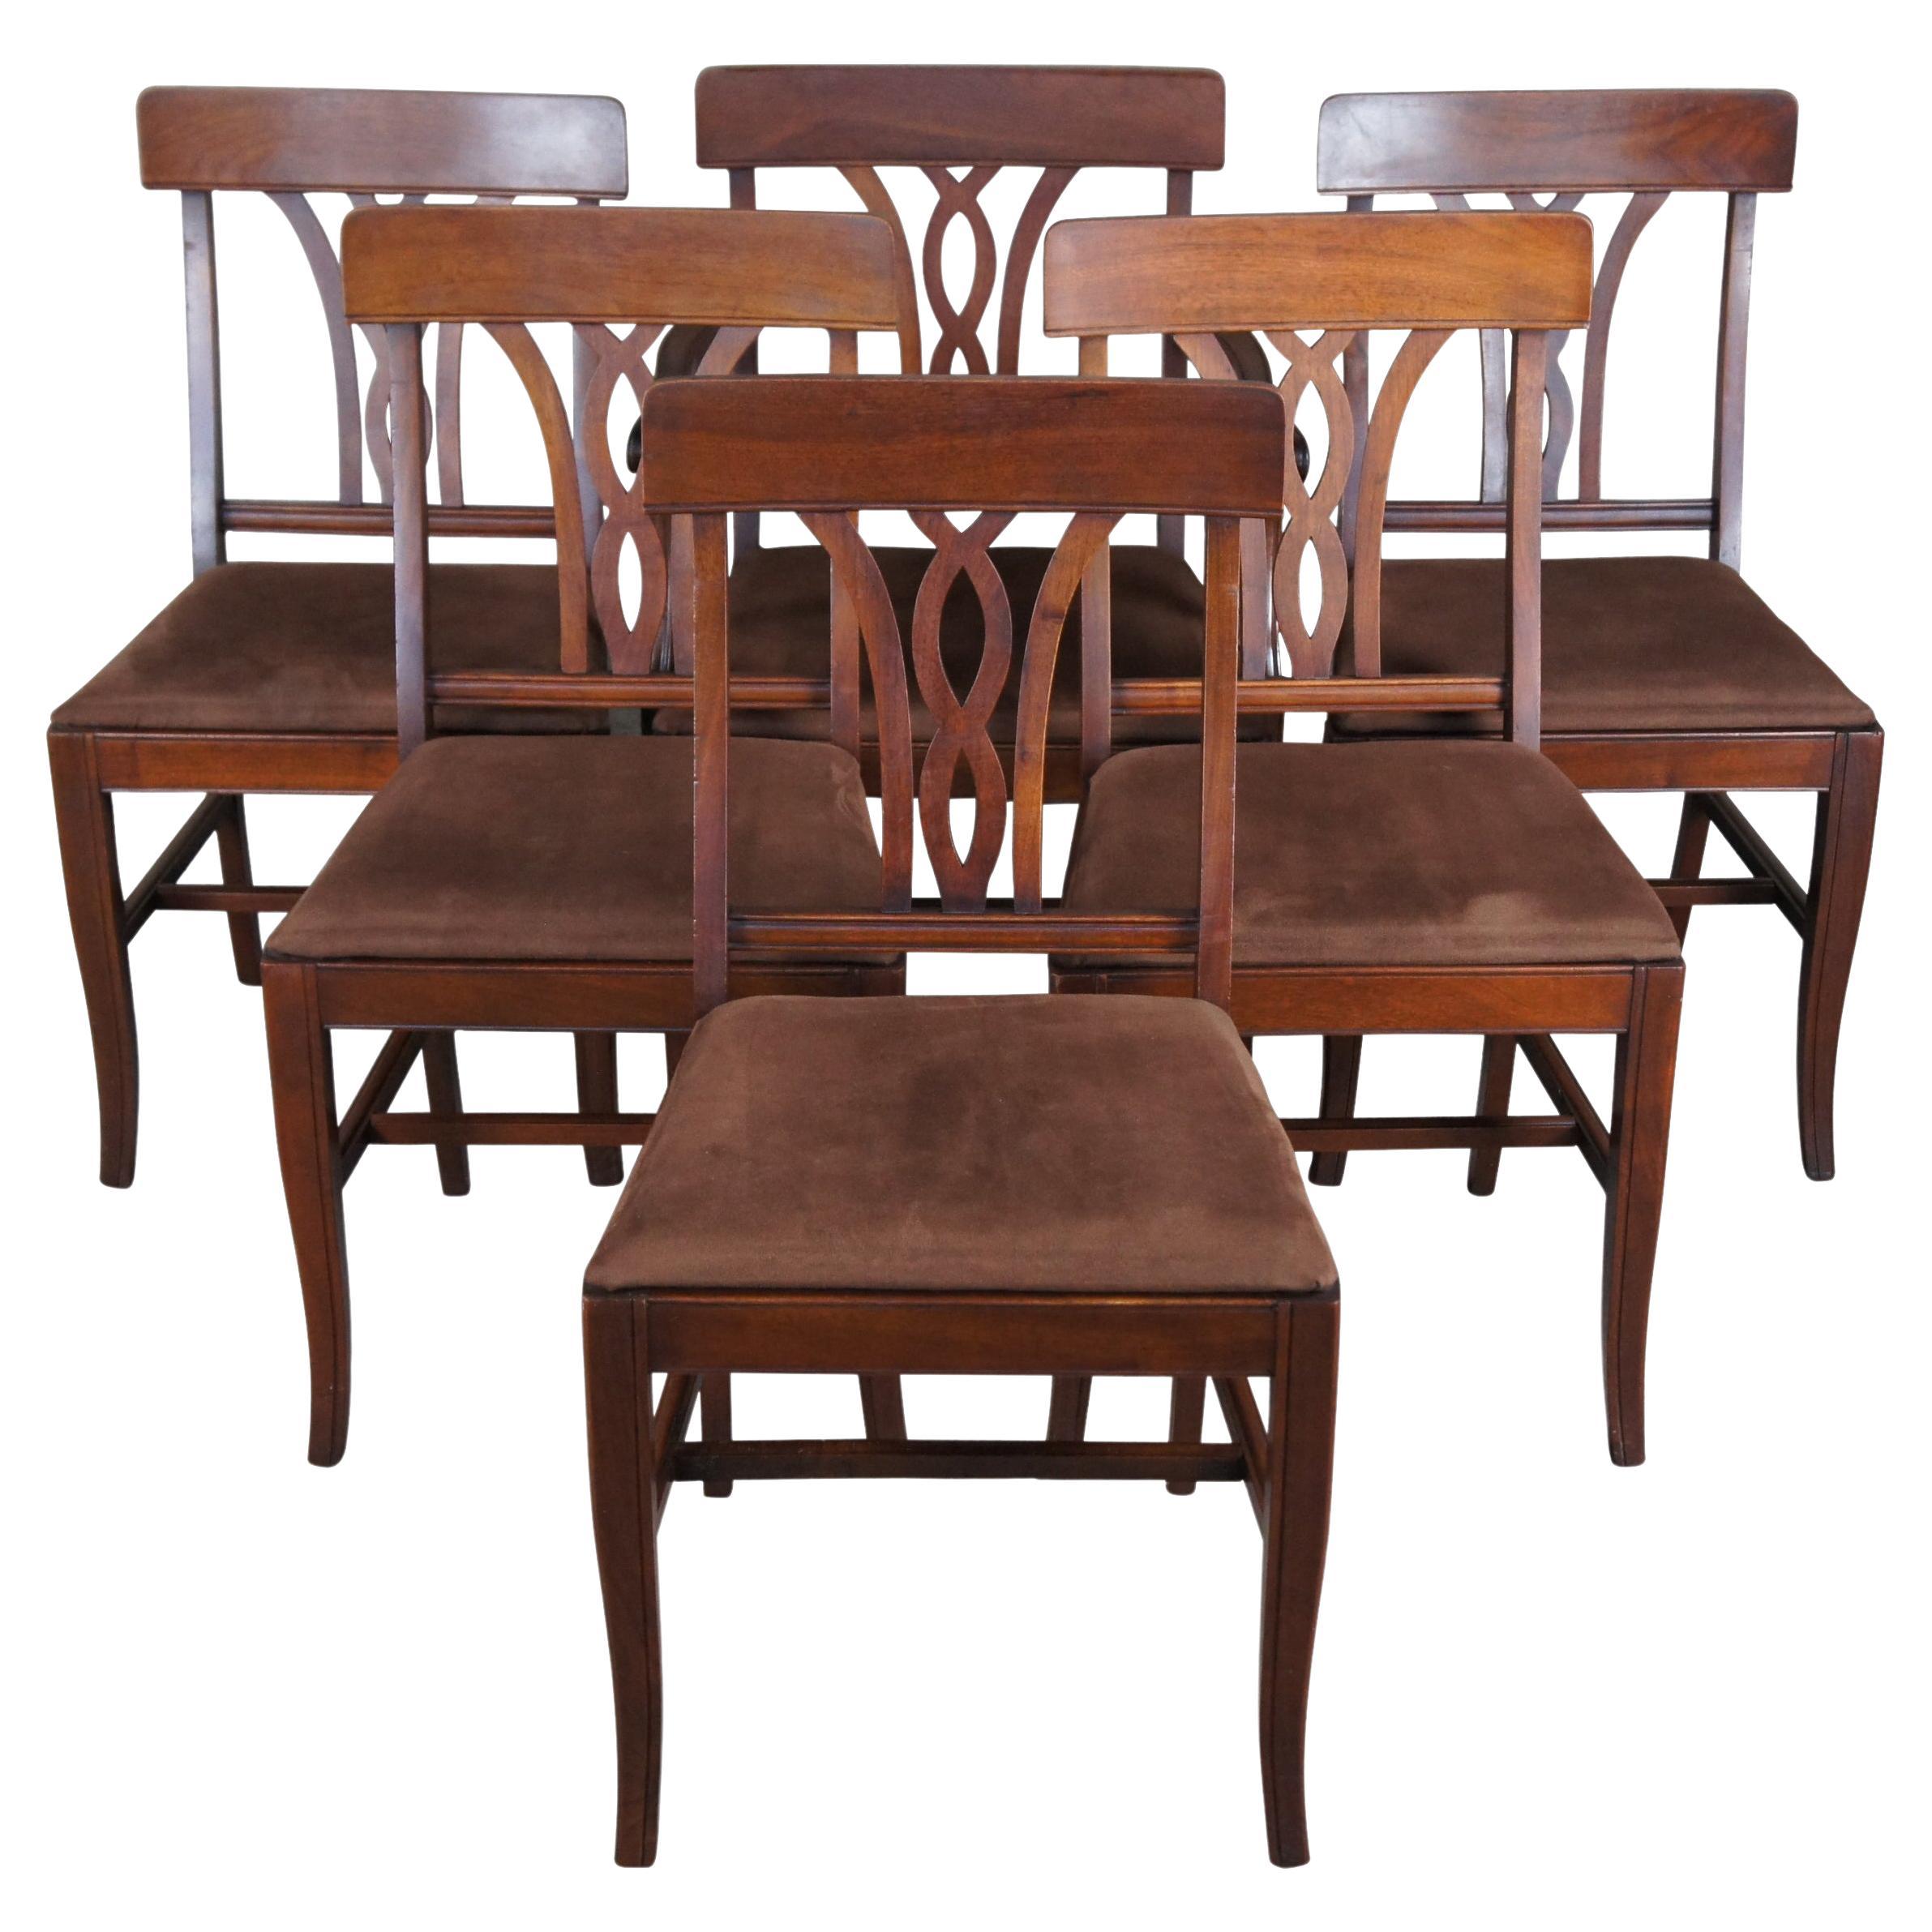 6 American Antique Early 20th Century Walnut Dining Chairs Suede Seat